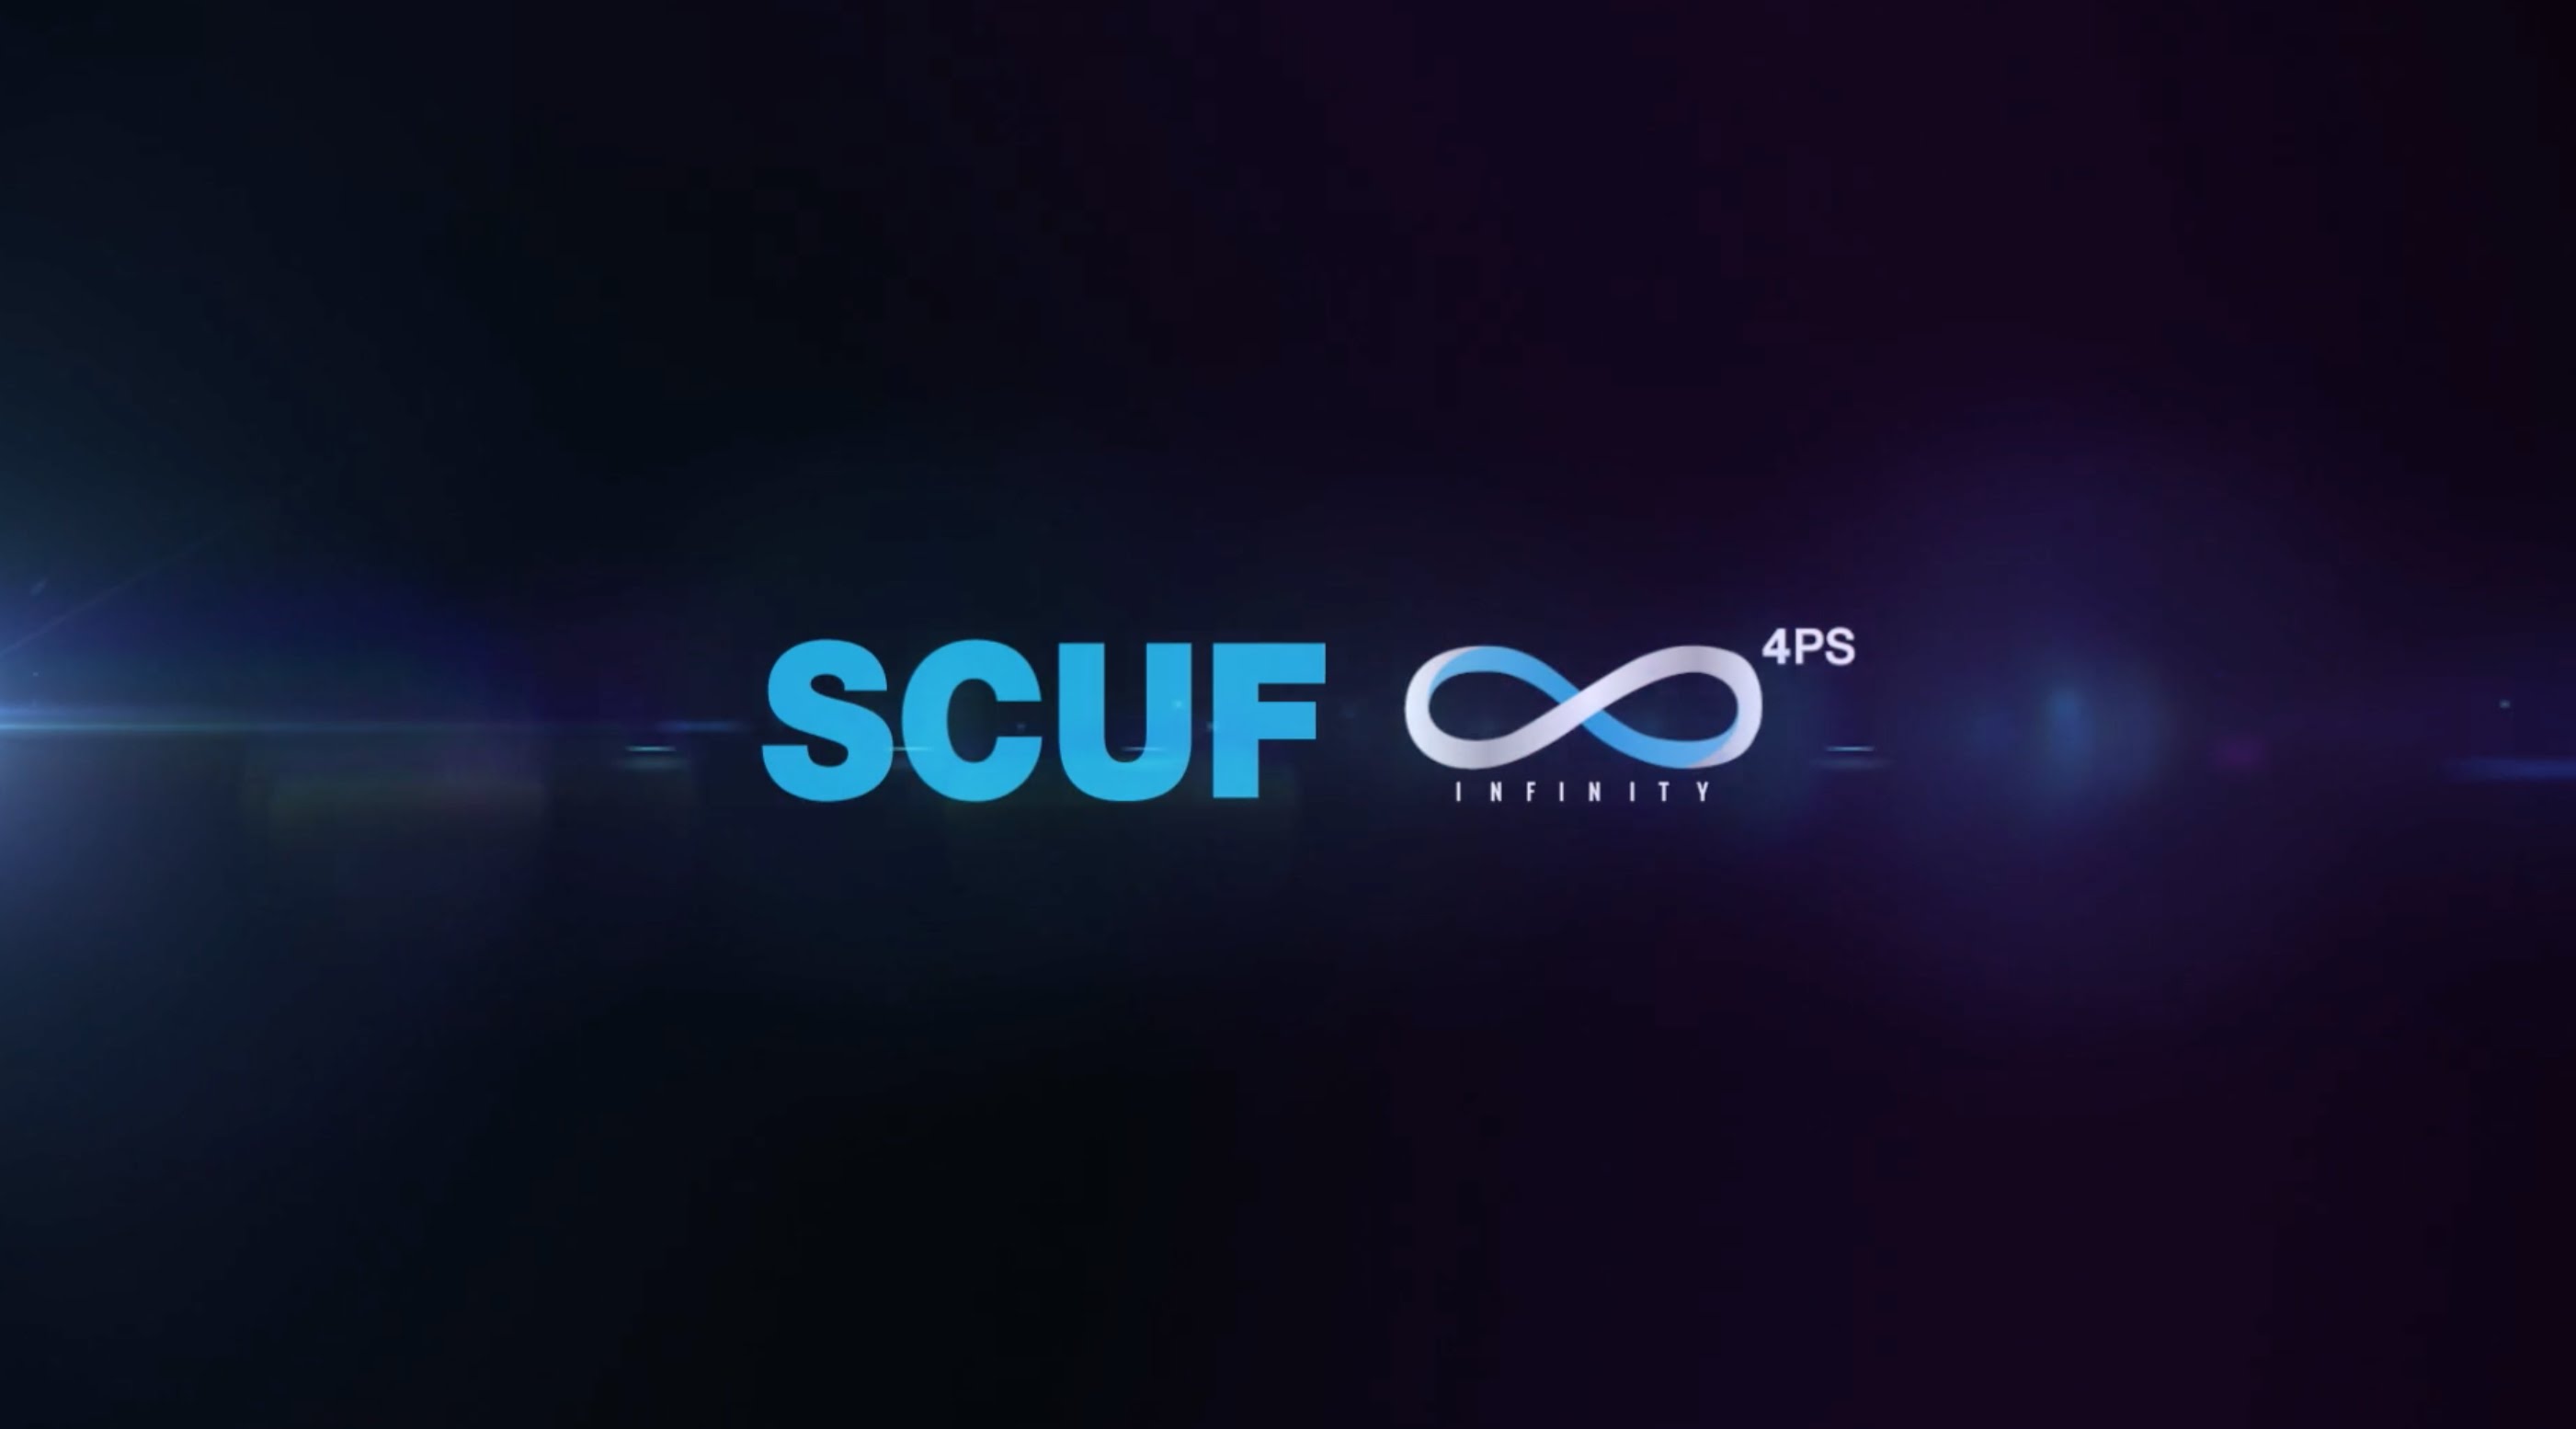 SCUF Infinity4PS